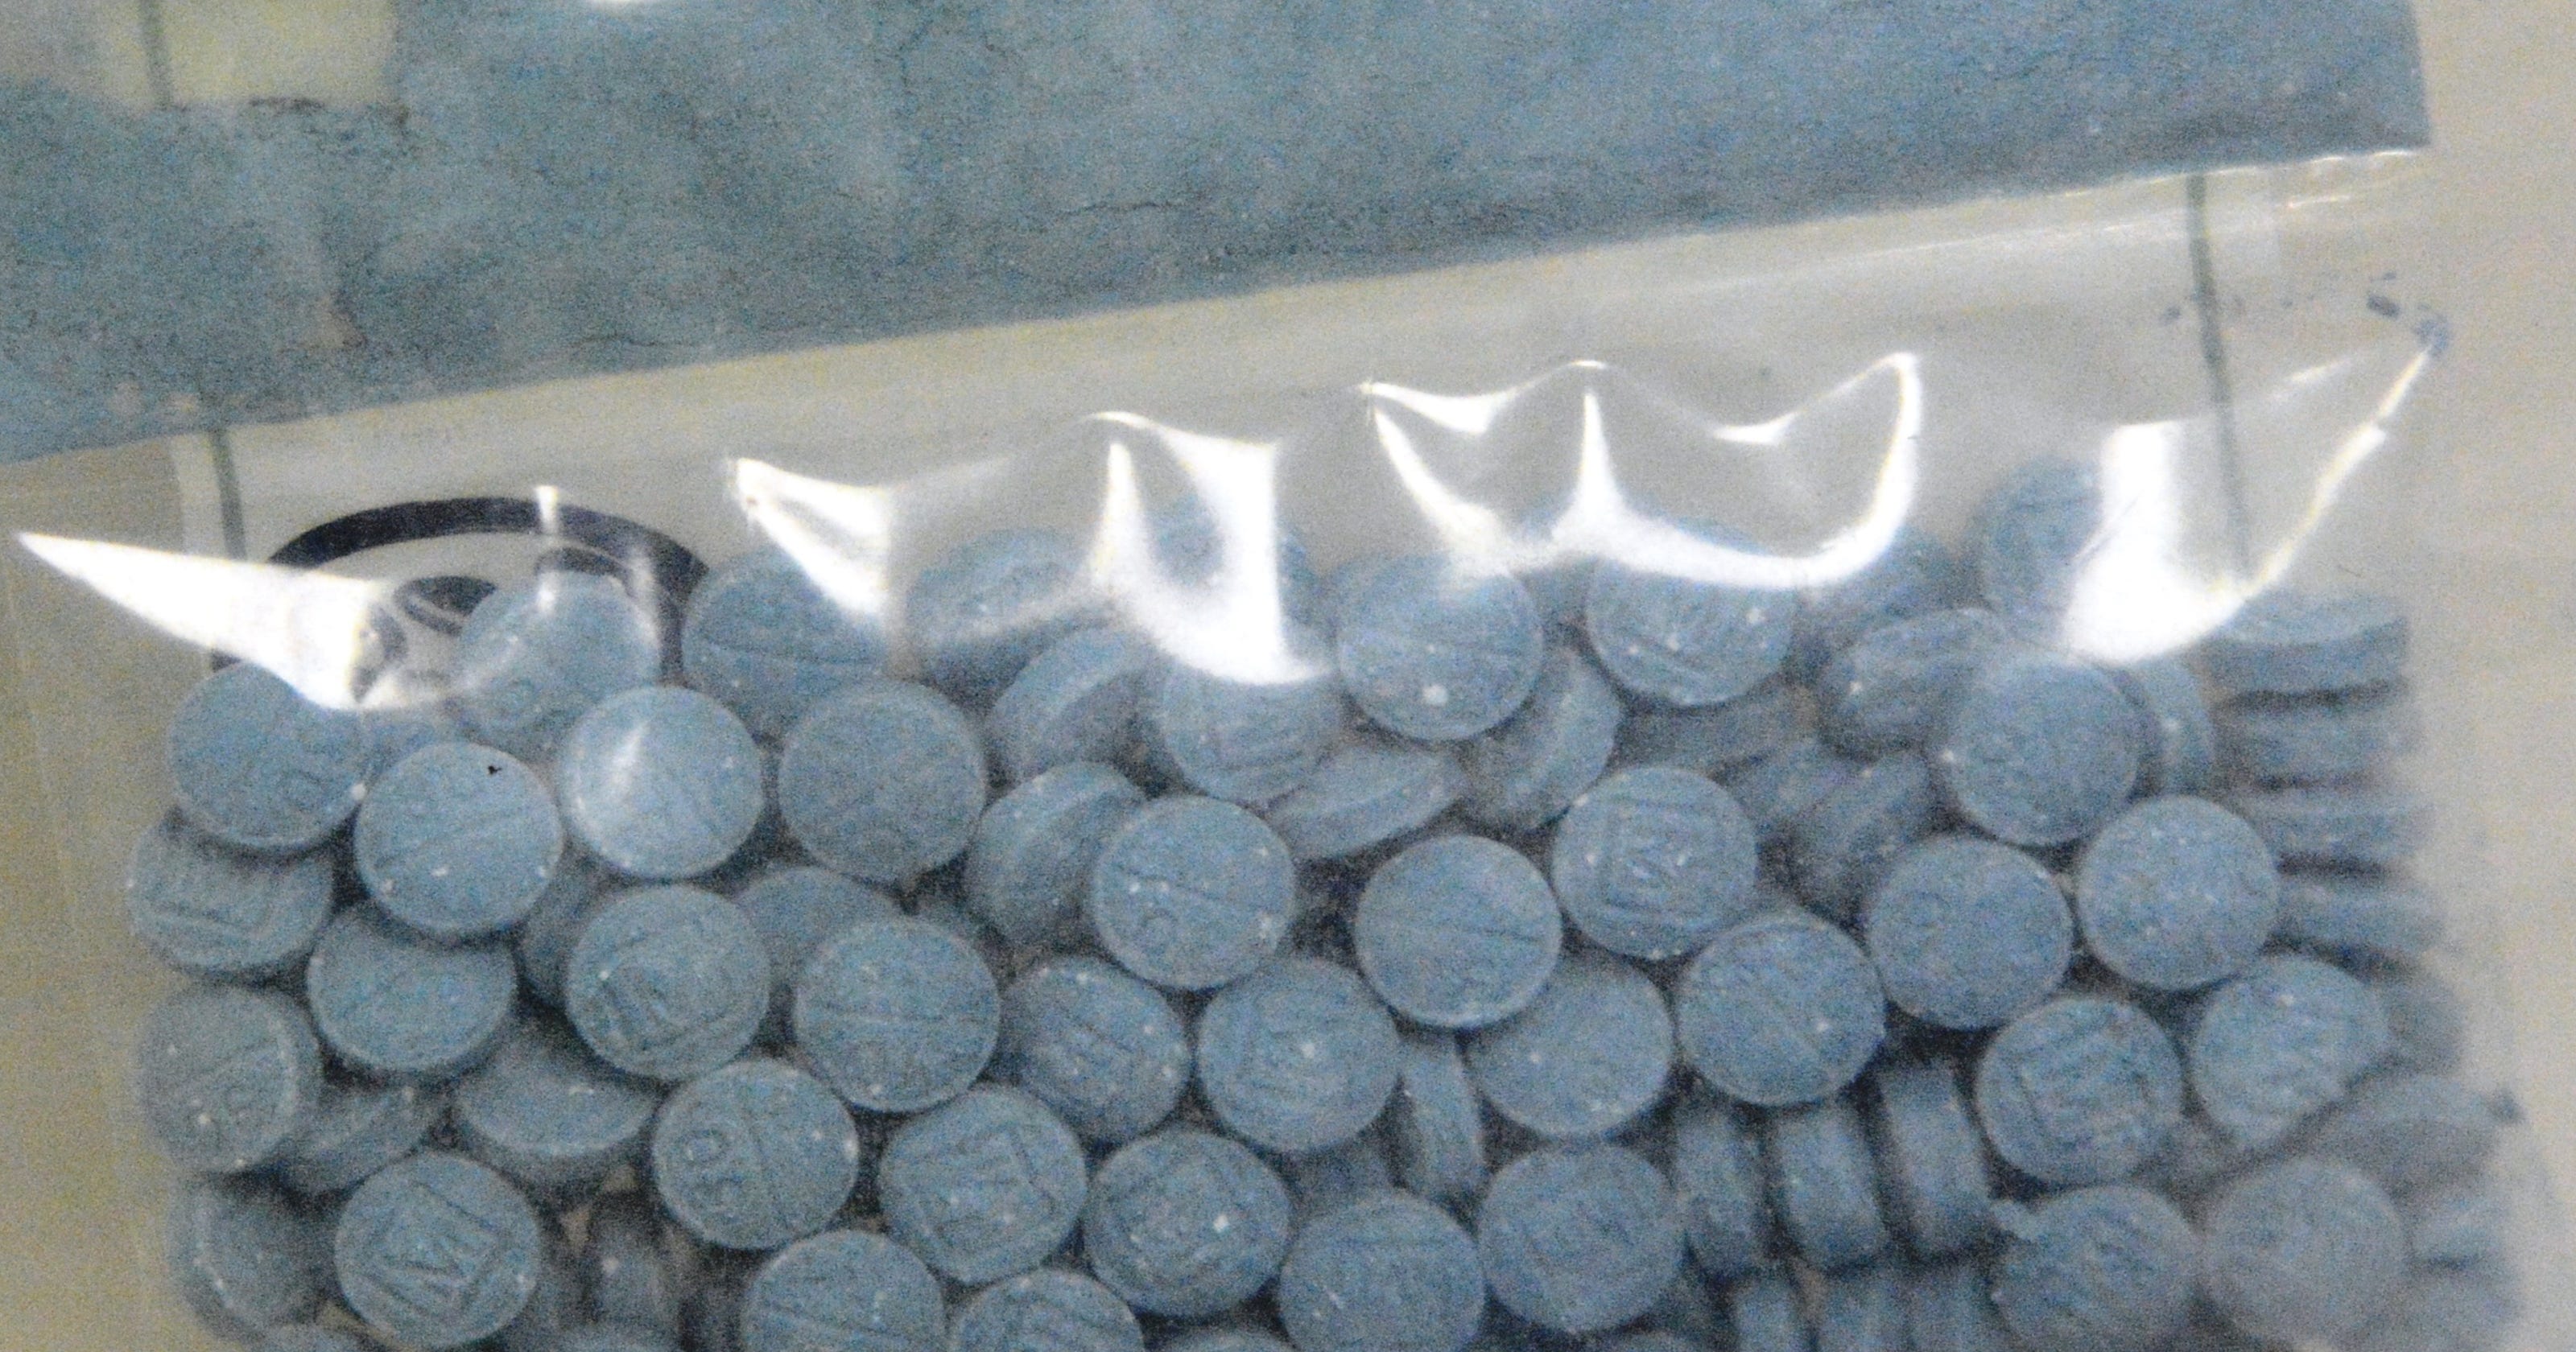 5-things-to-know-about-trendy-street-drug-fentanyl